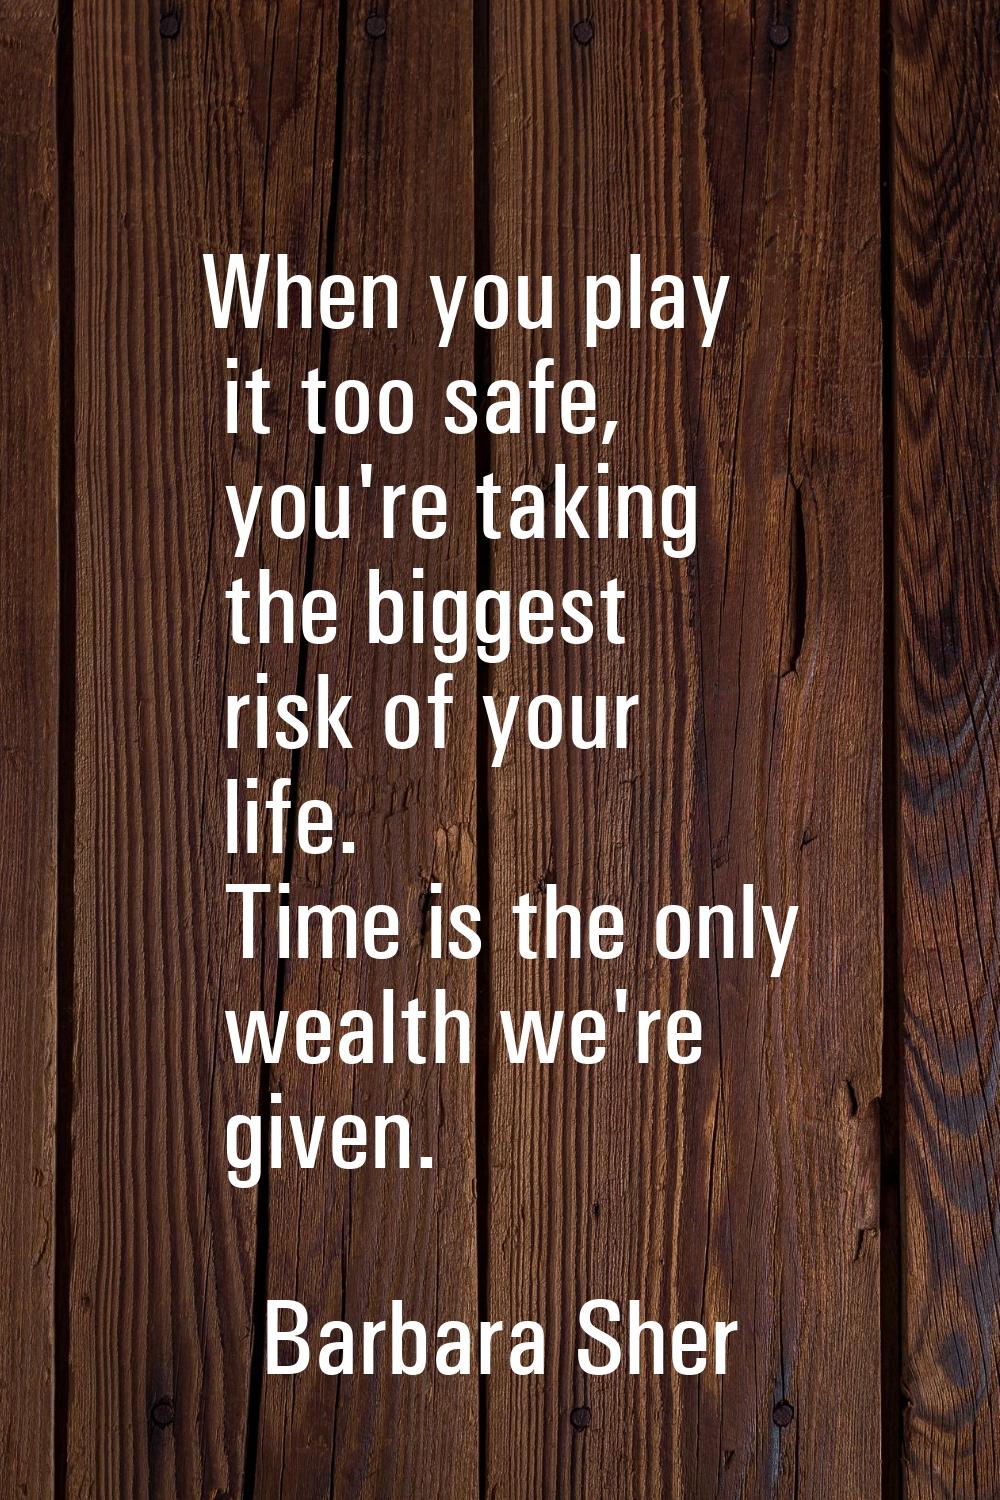 When you play it too safe, you're taking the biggest risk of your life. Time is the only wealth we'